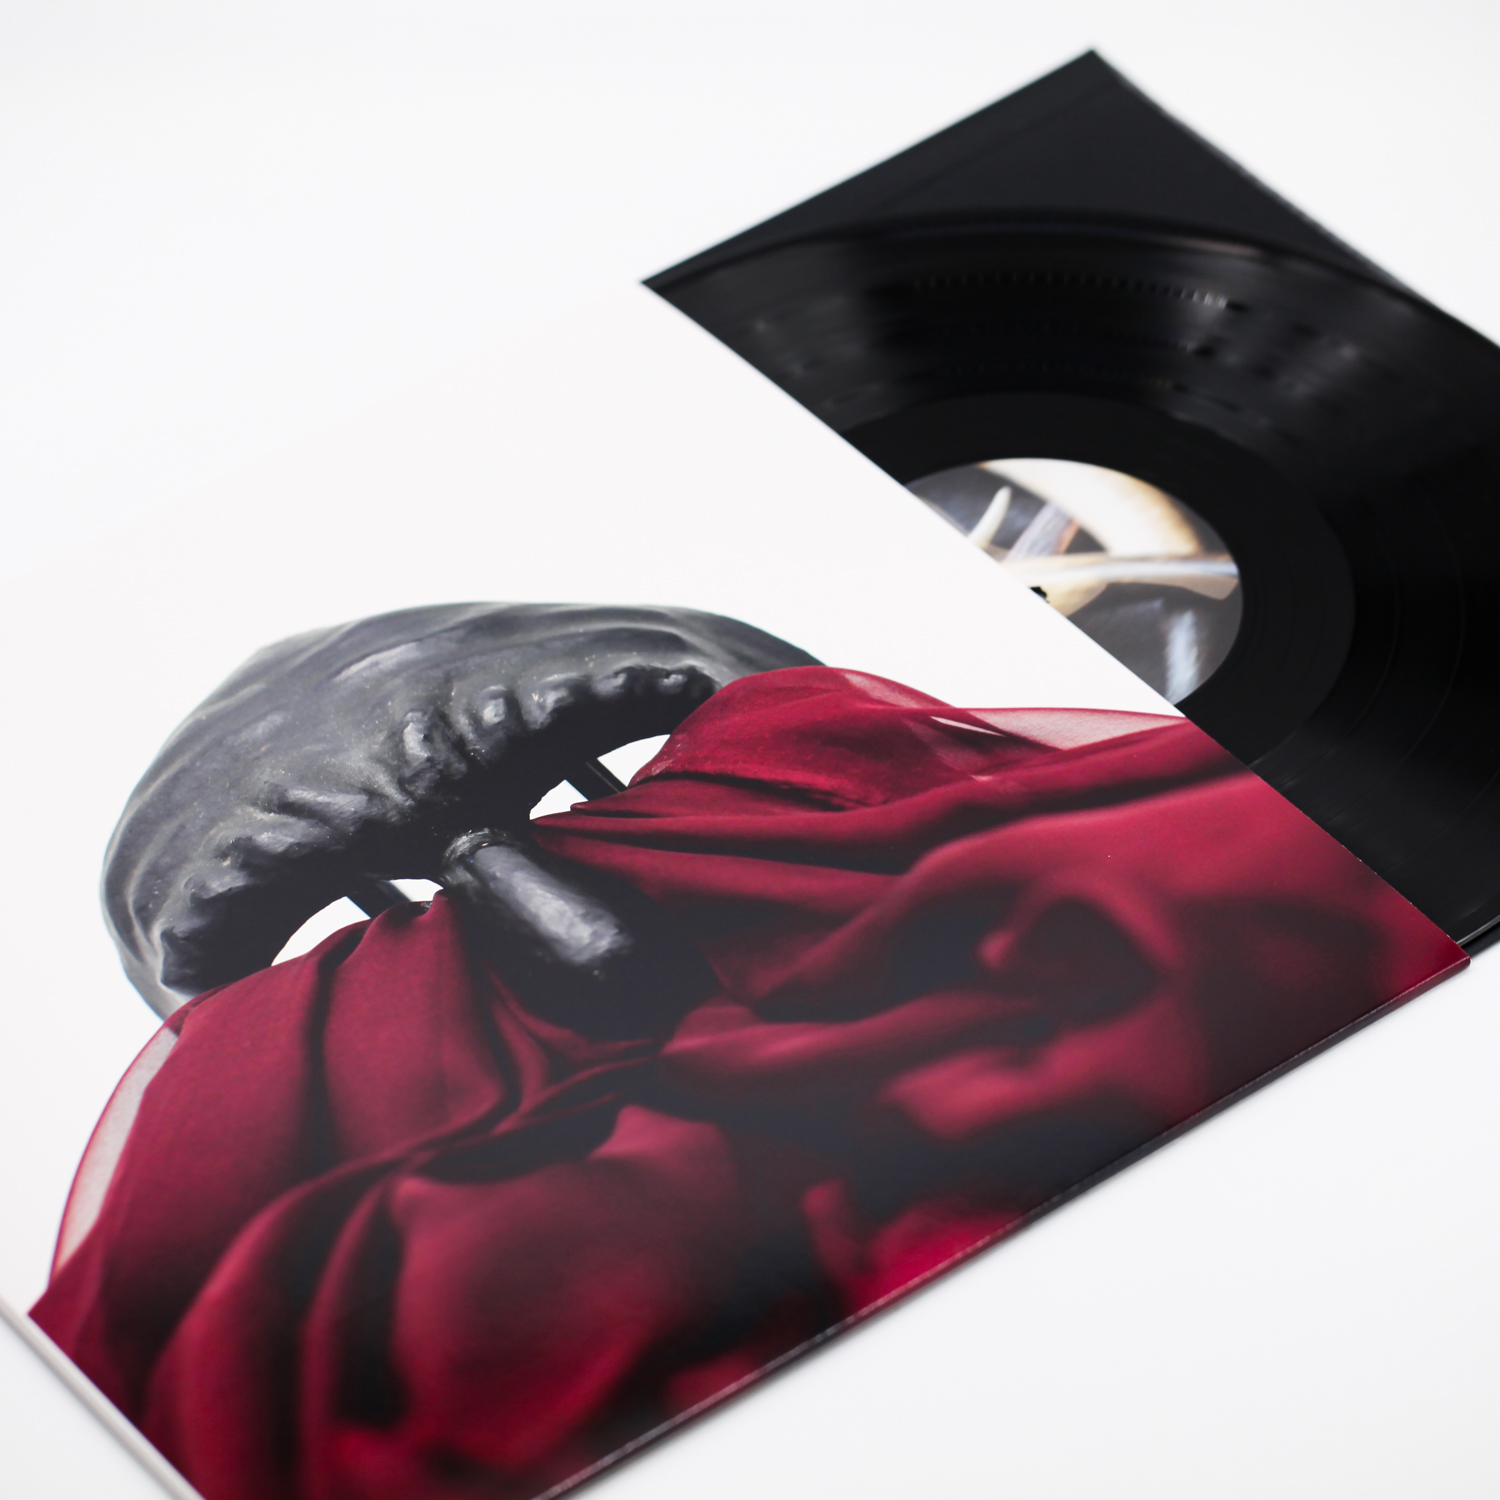 caverna-delle-rose-elysian-chants-vinyl-black-ritual-neoclassical-neofolk-ambient-orphic-hymns-design-2022-diego-cinquegrana-aimaproject-sa-all-rights-reserved-photo-1